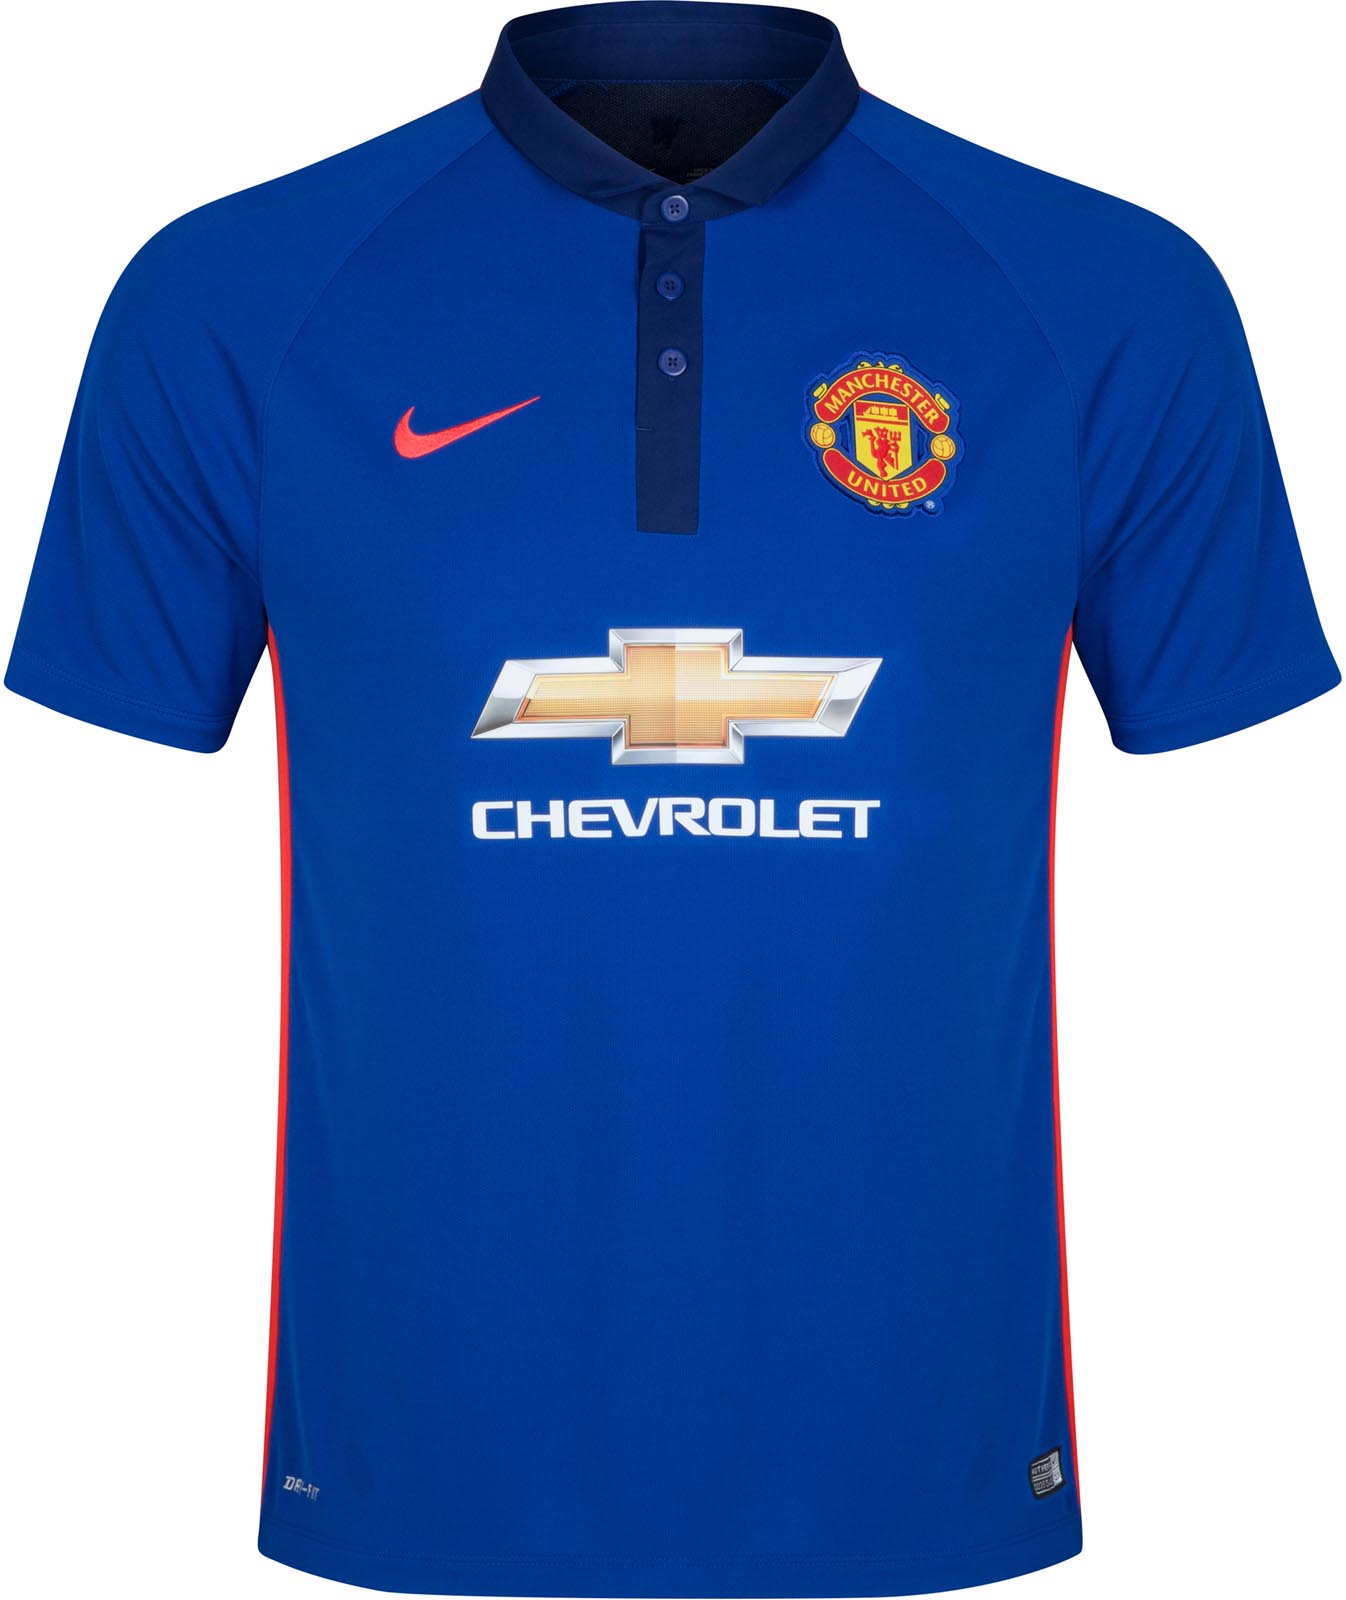 simple: MANCHESTER UNITED 14-15 HOME, AWAY AND THIRD KITS